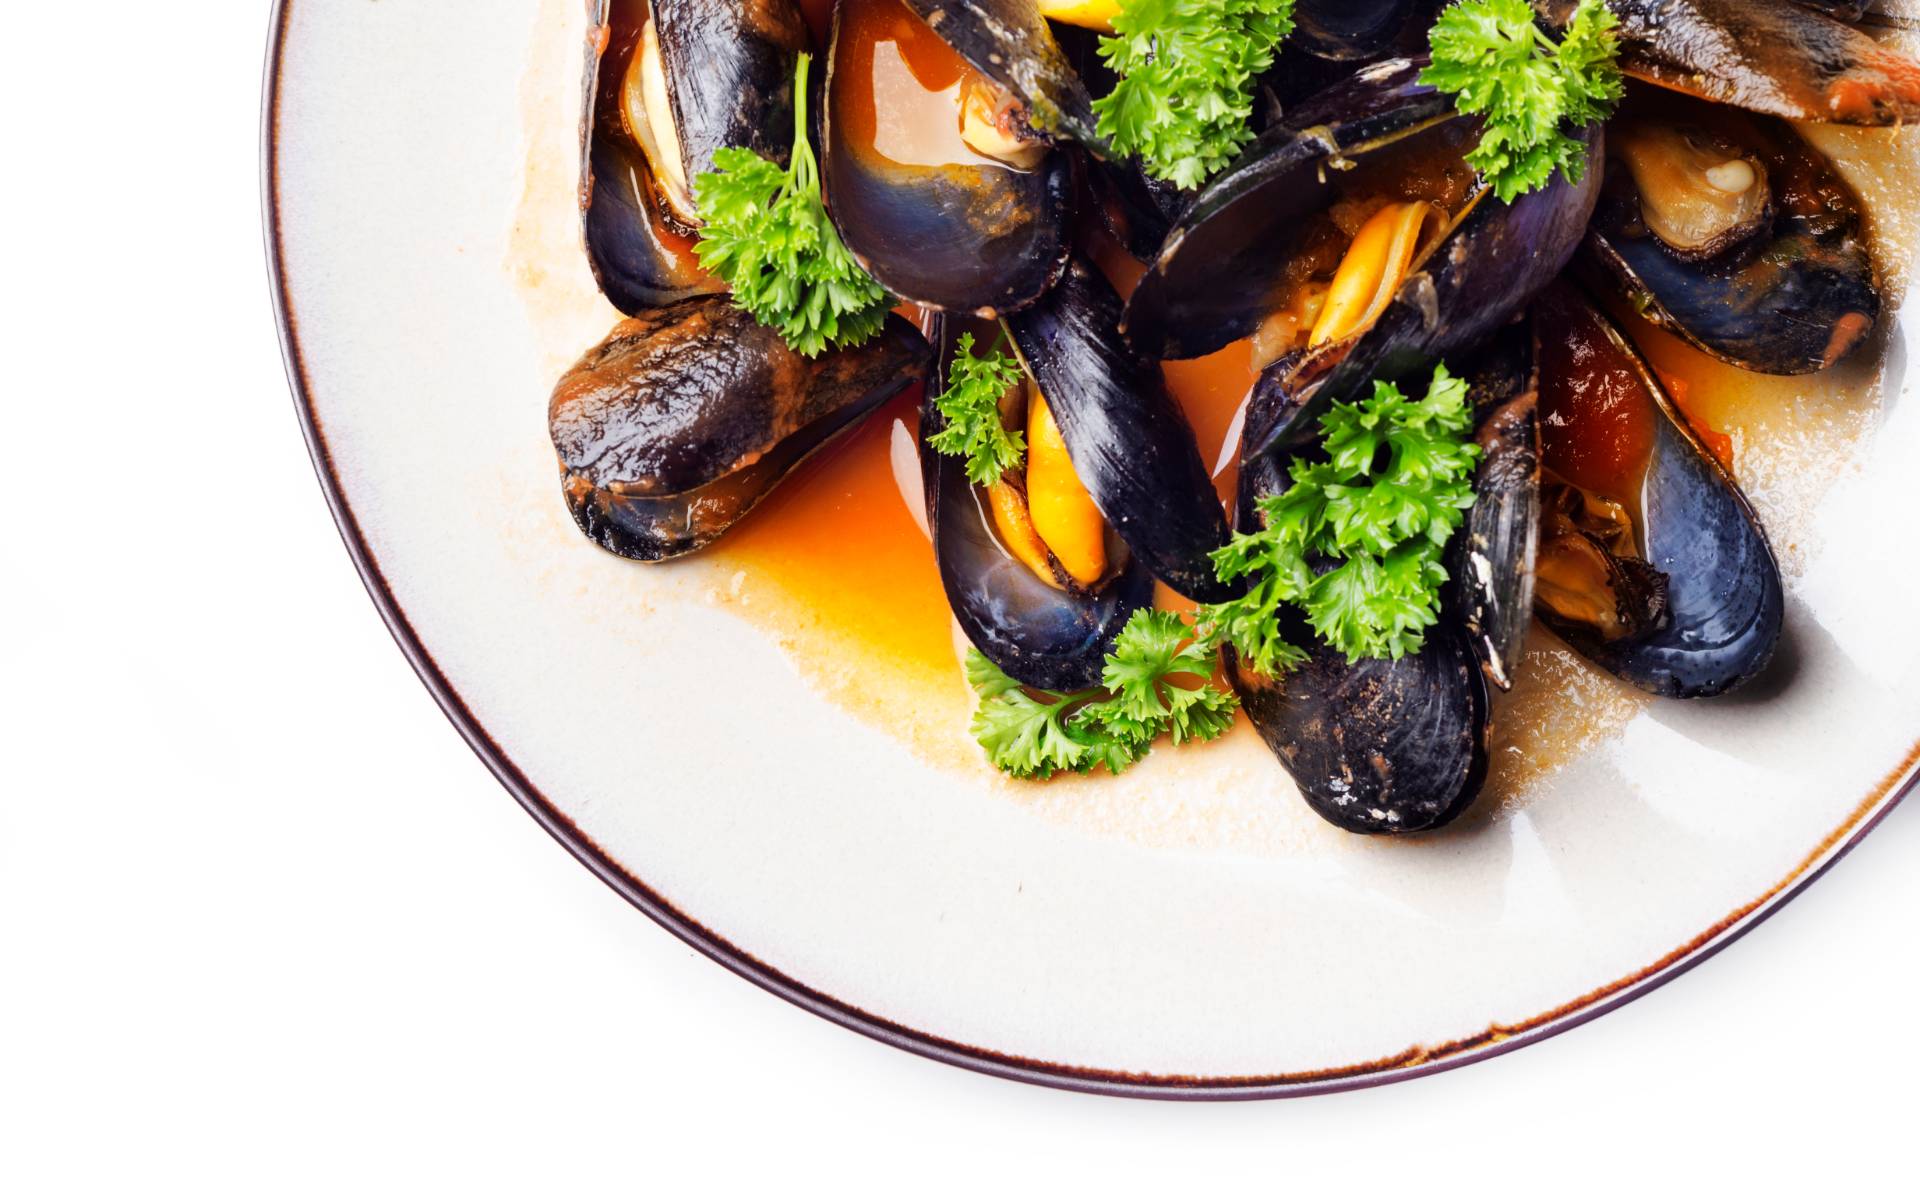 Fish and seafood from A to Z Mussels - Frozen Seafood